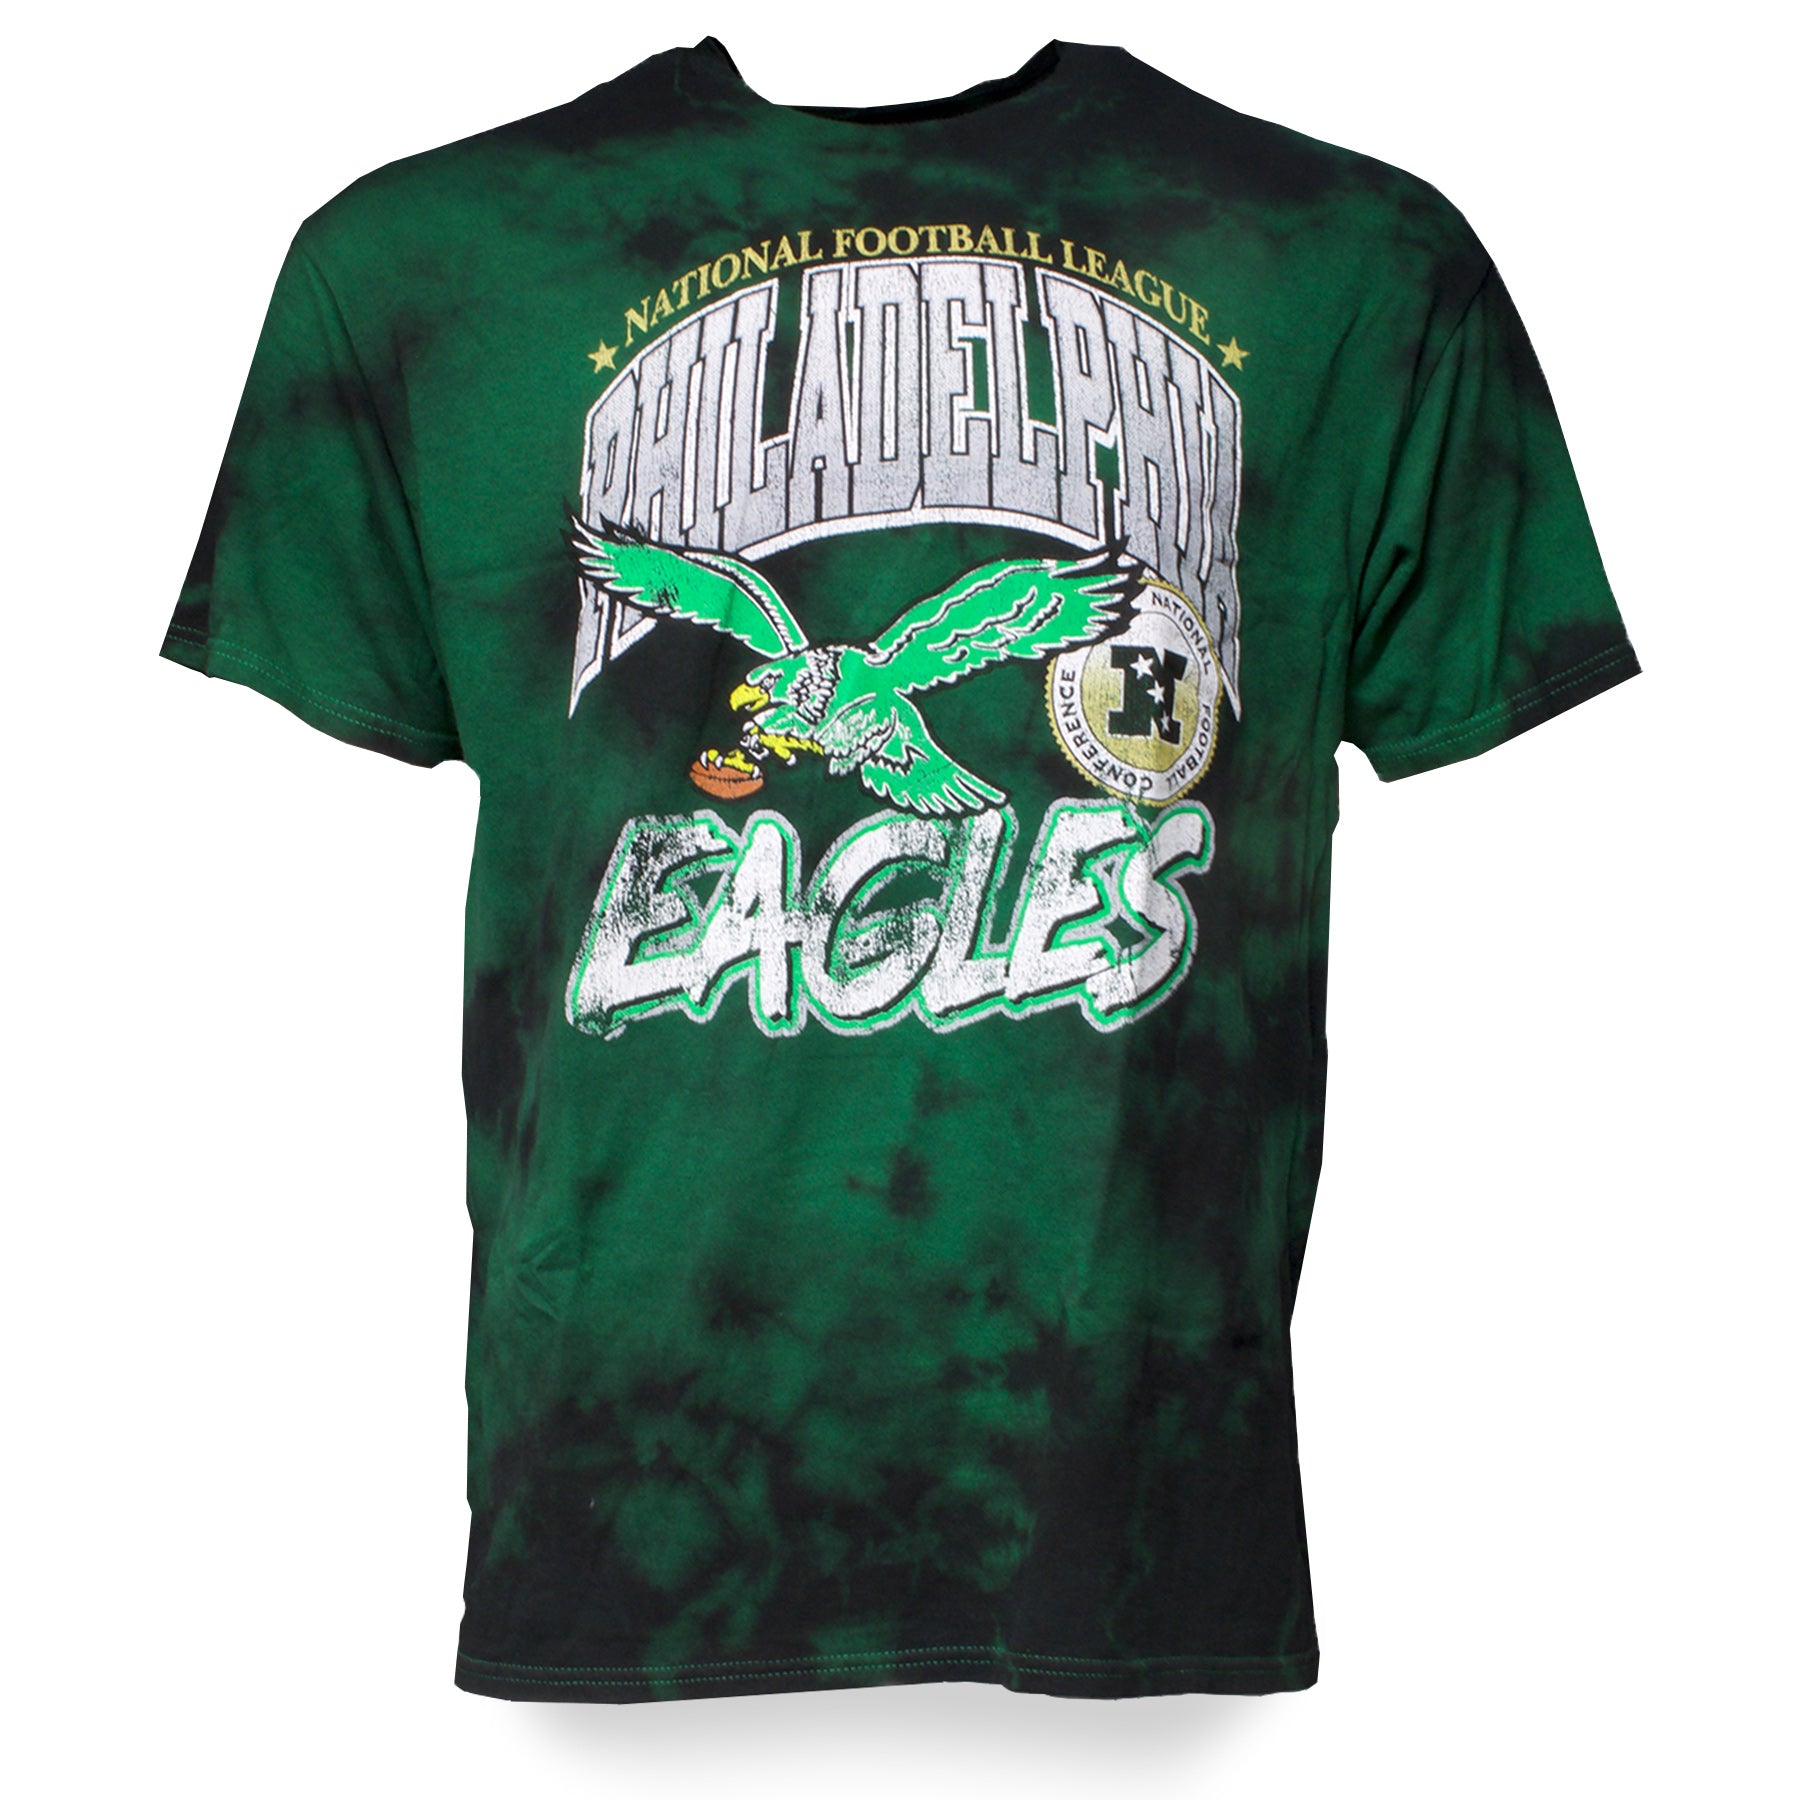 the eagles t shirts vintage